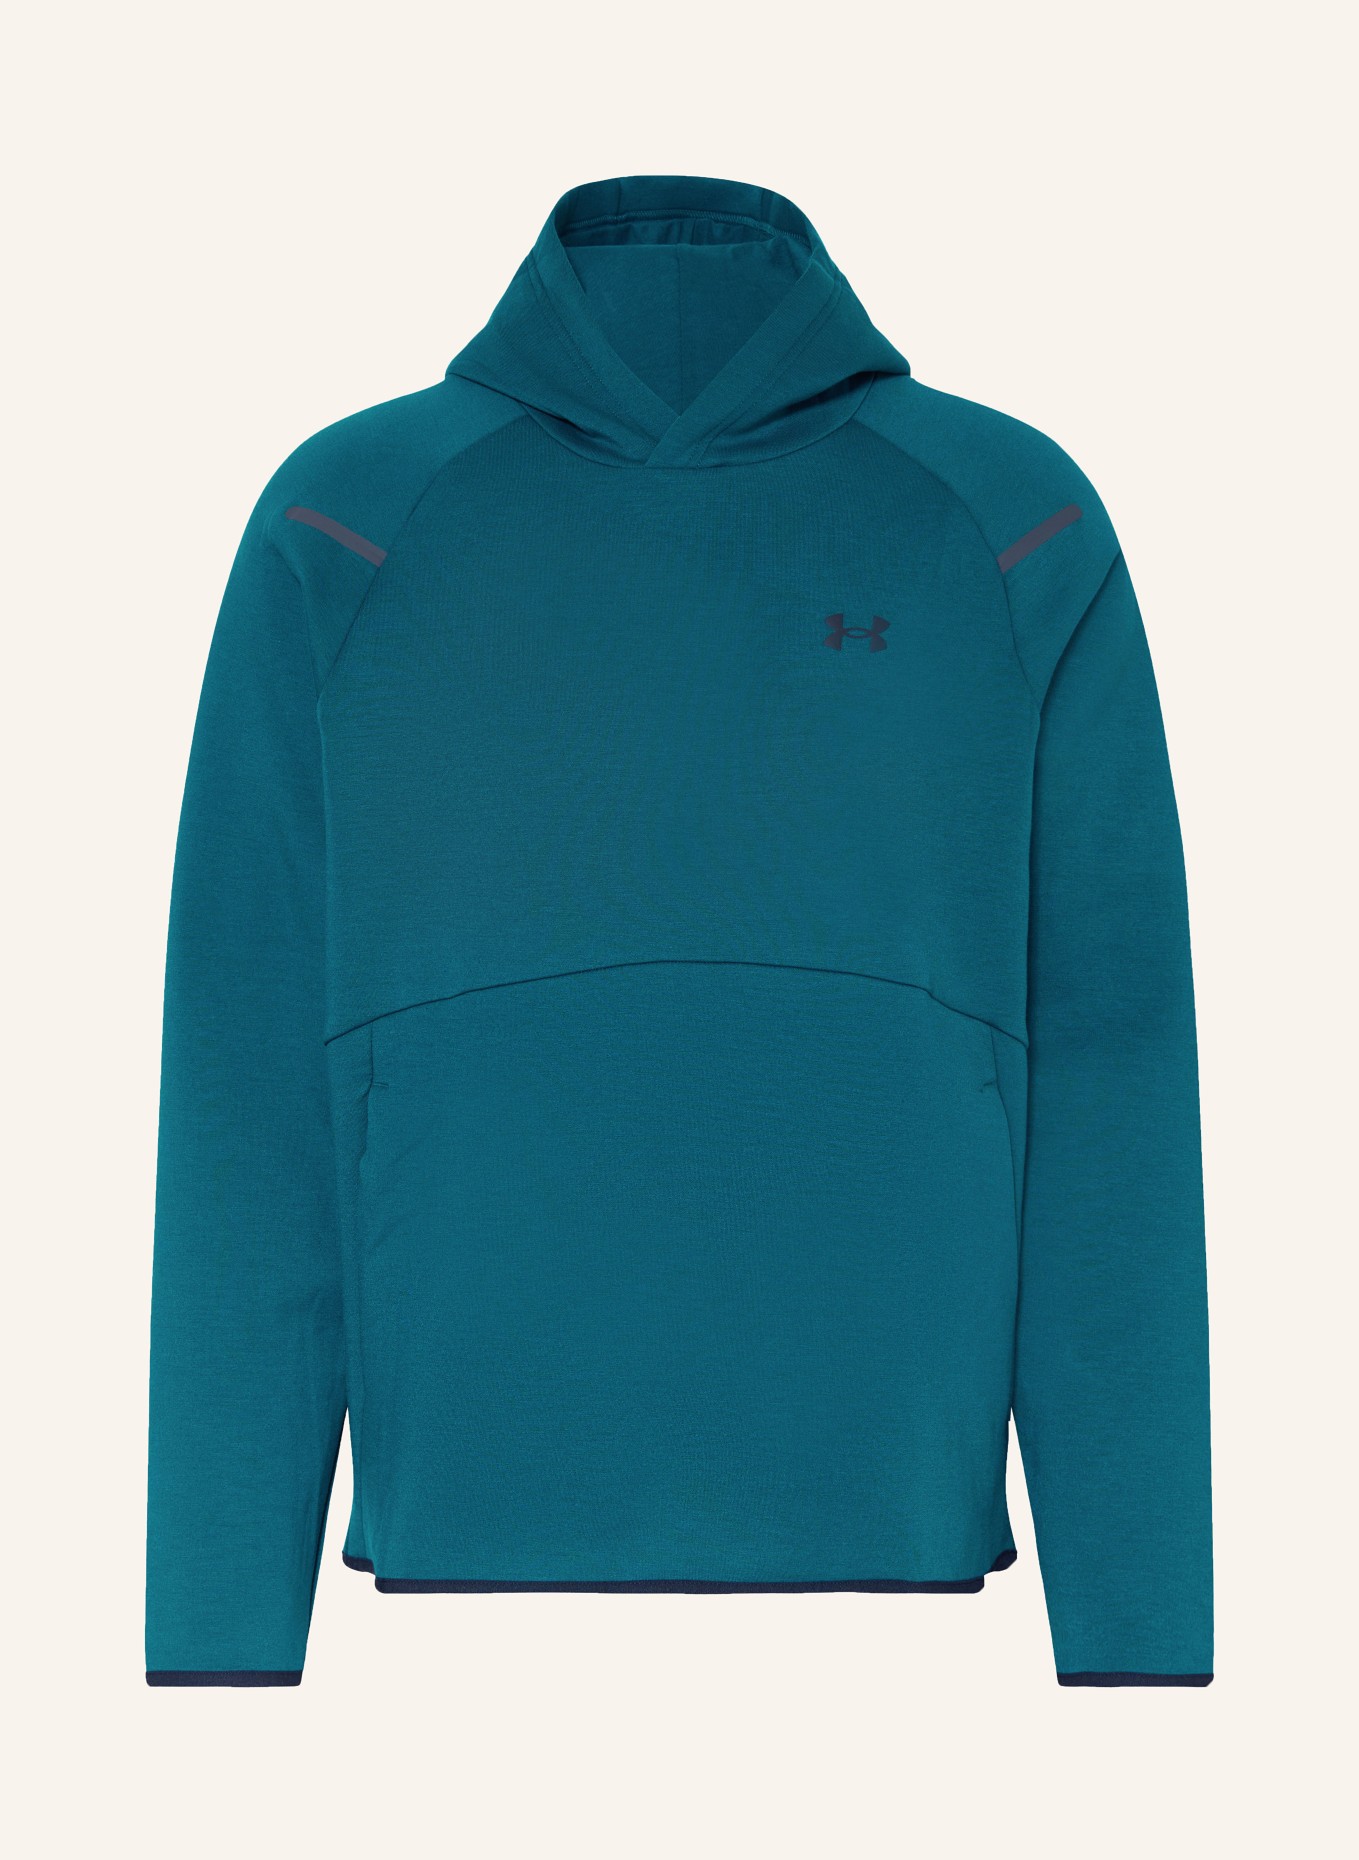 UNDER ARMOUR Hoodie UNSTOPPABLE, Farbe: PETROL (Bild 1)